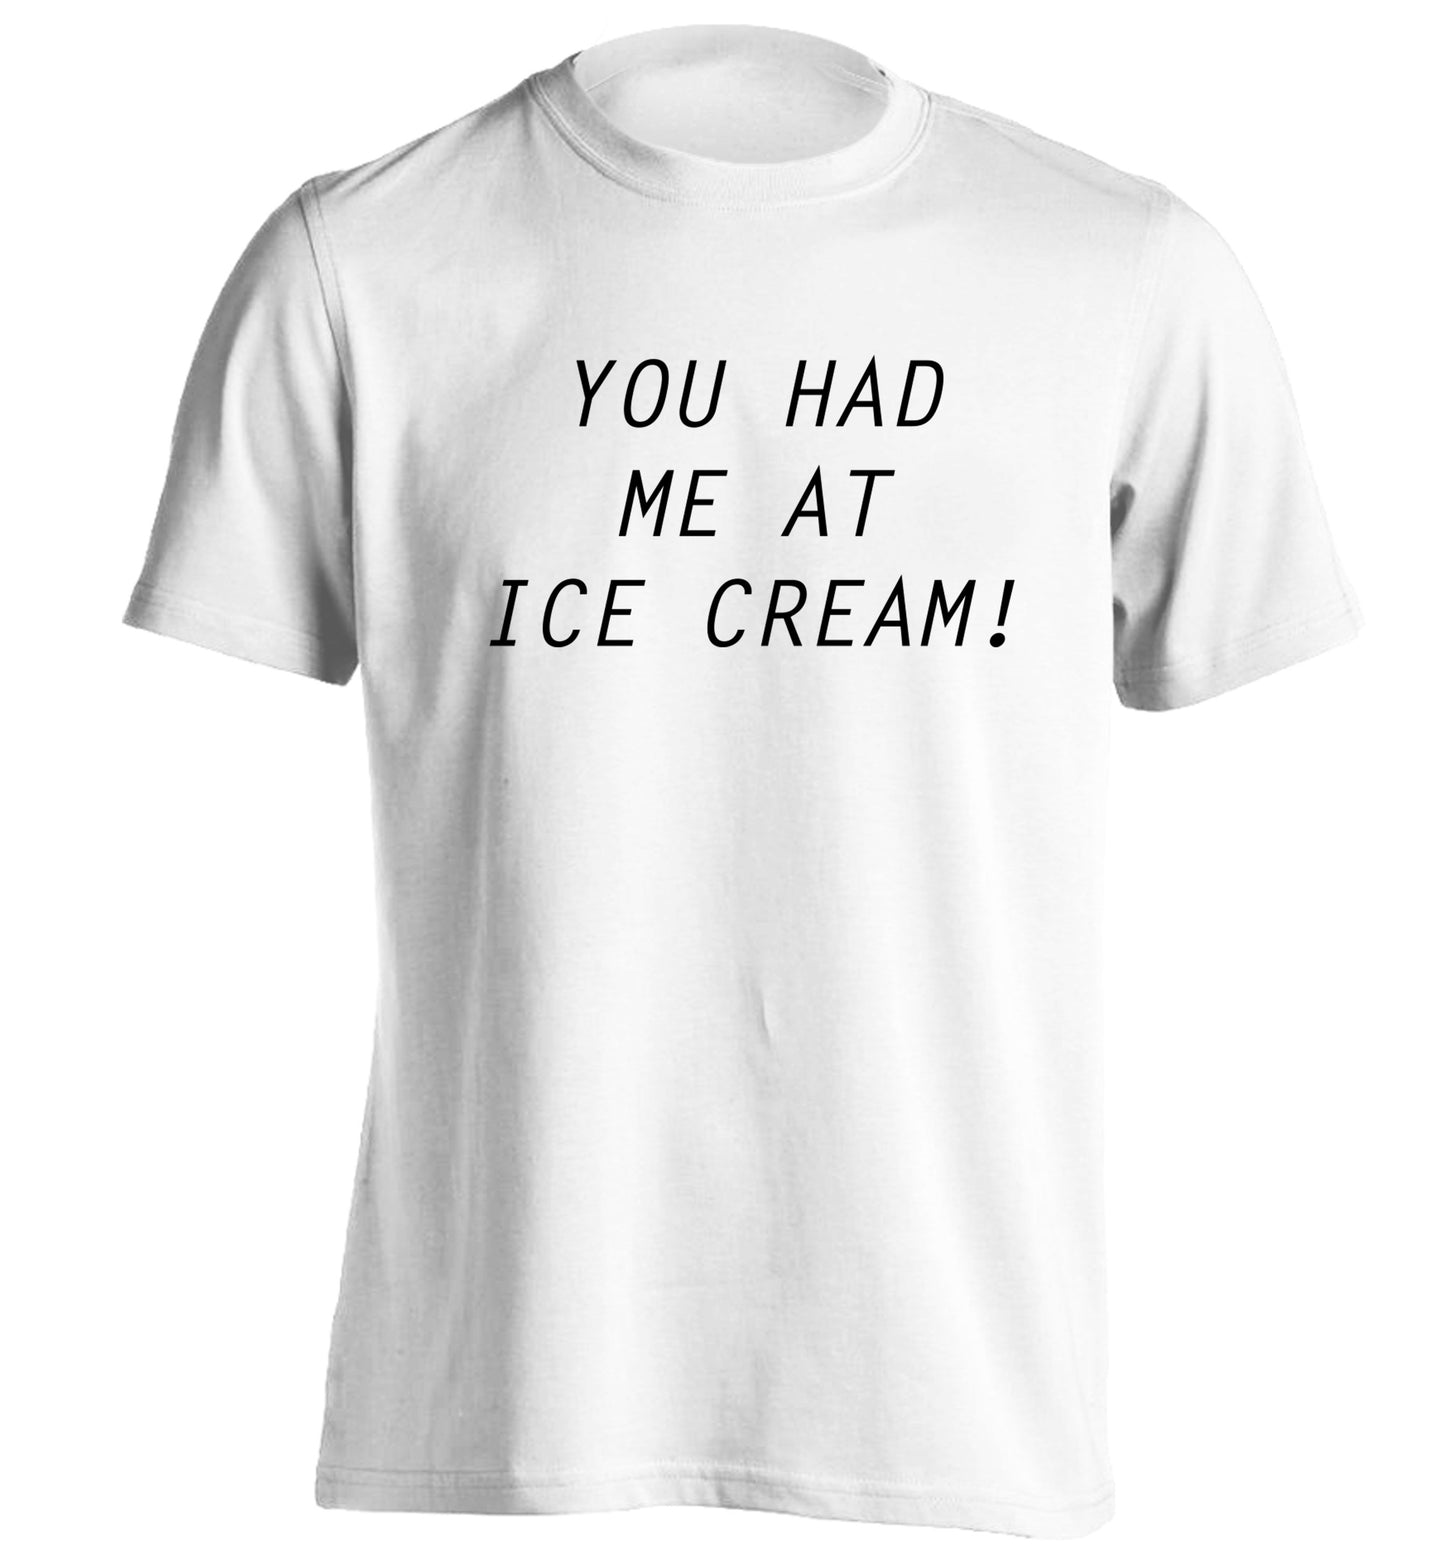 You had me at ice cream adults unisex white Tshirt 2XL